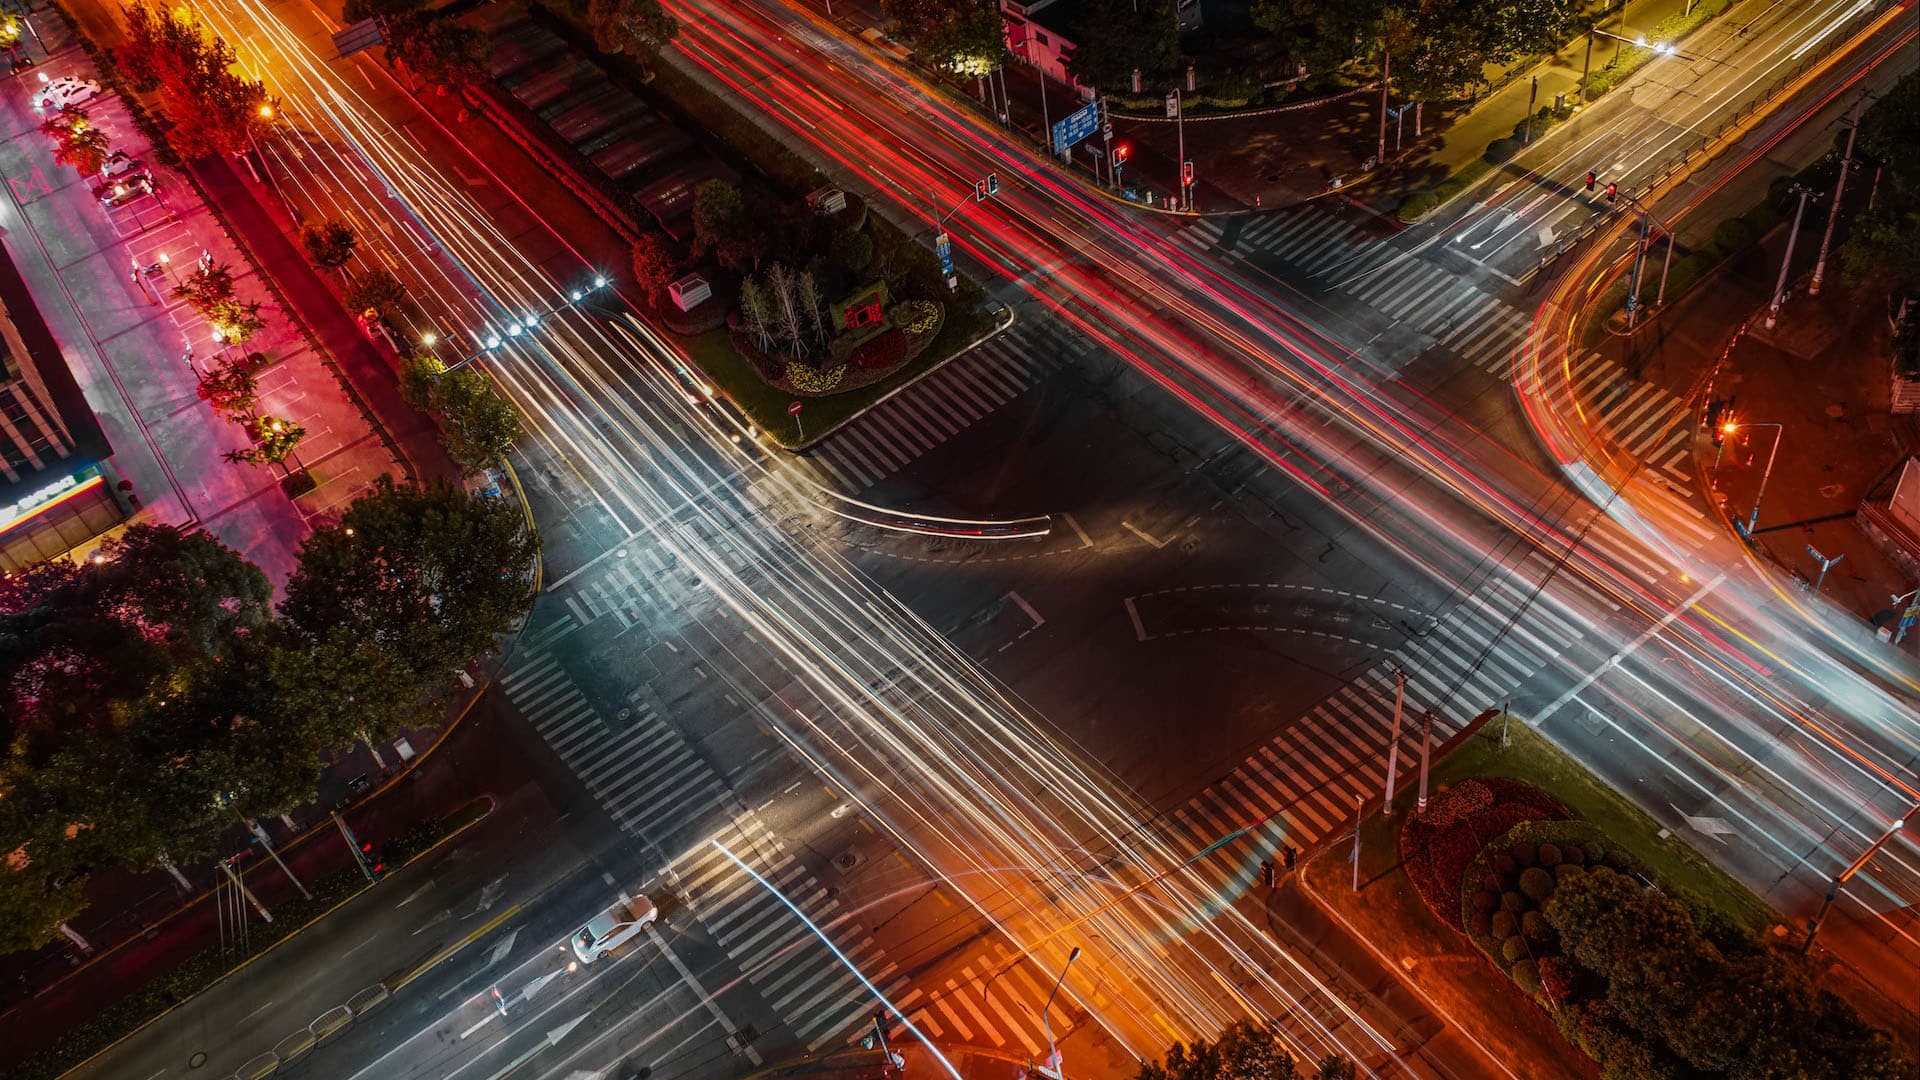 time-lapse image shows cars moving through an intersection at night